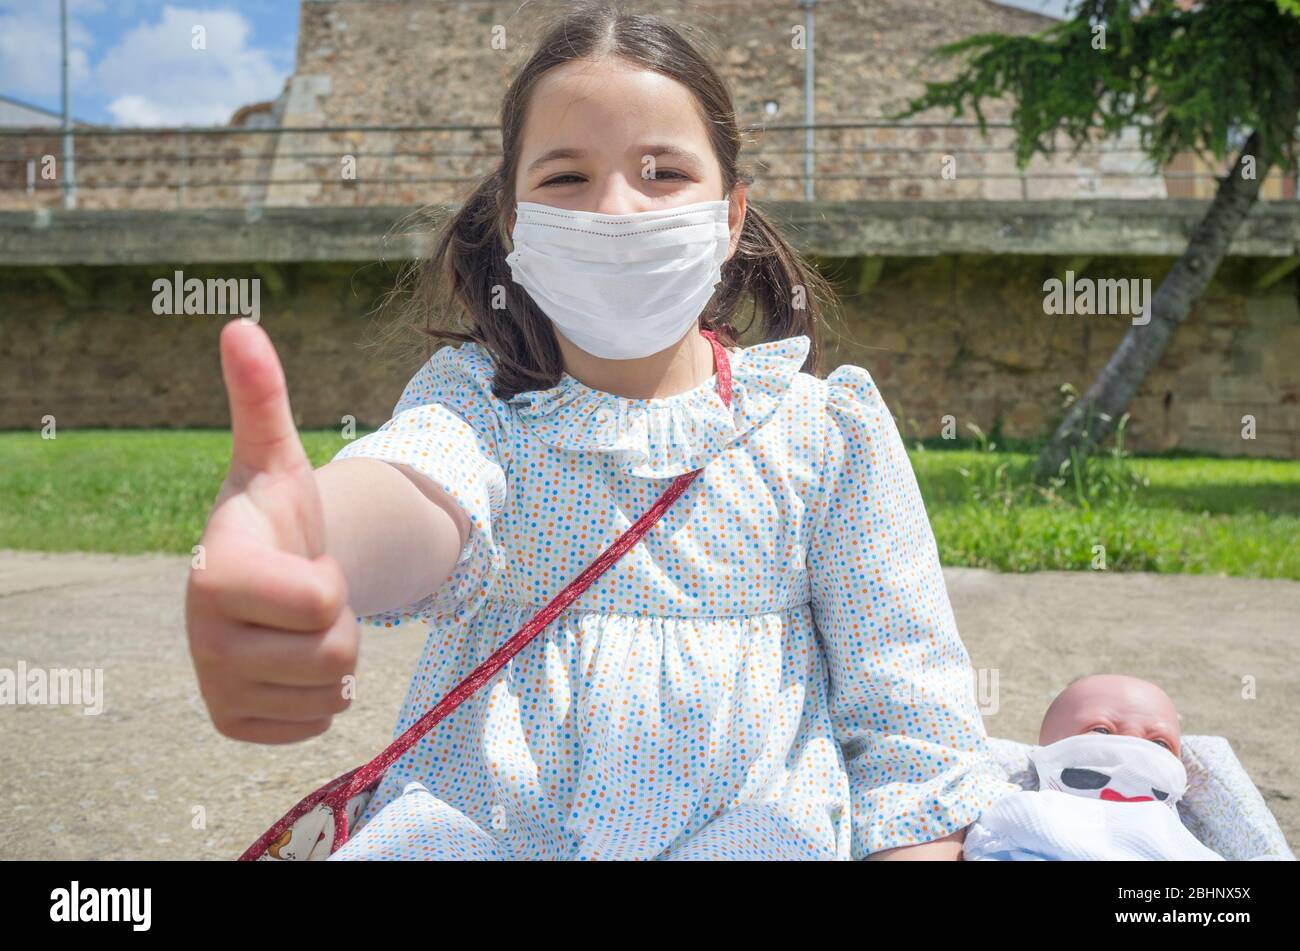 Little girl happy in her first day of children outing cause relaxation of confinement measures. SHe and her reborn doll are wearing face mask Stock Photo